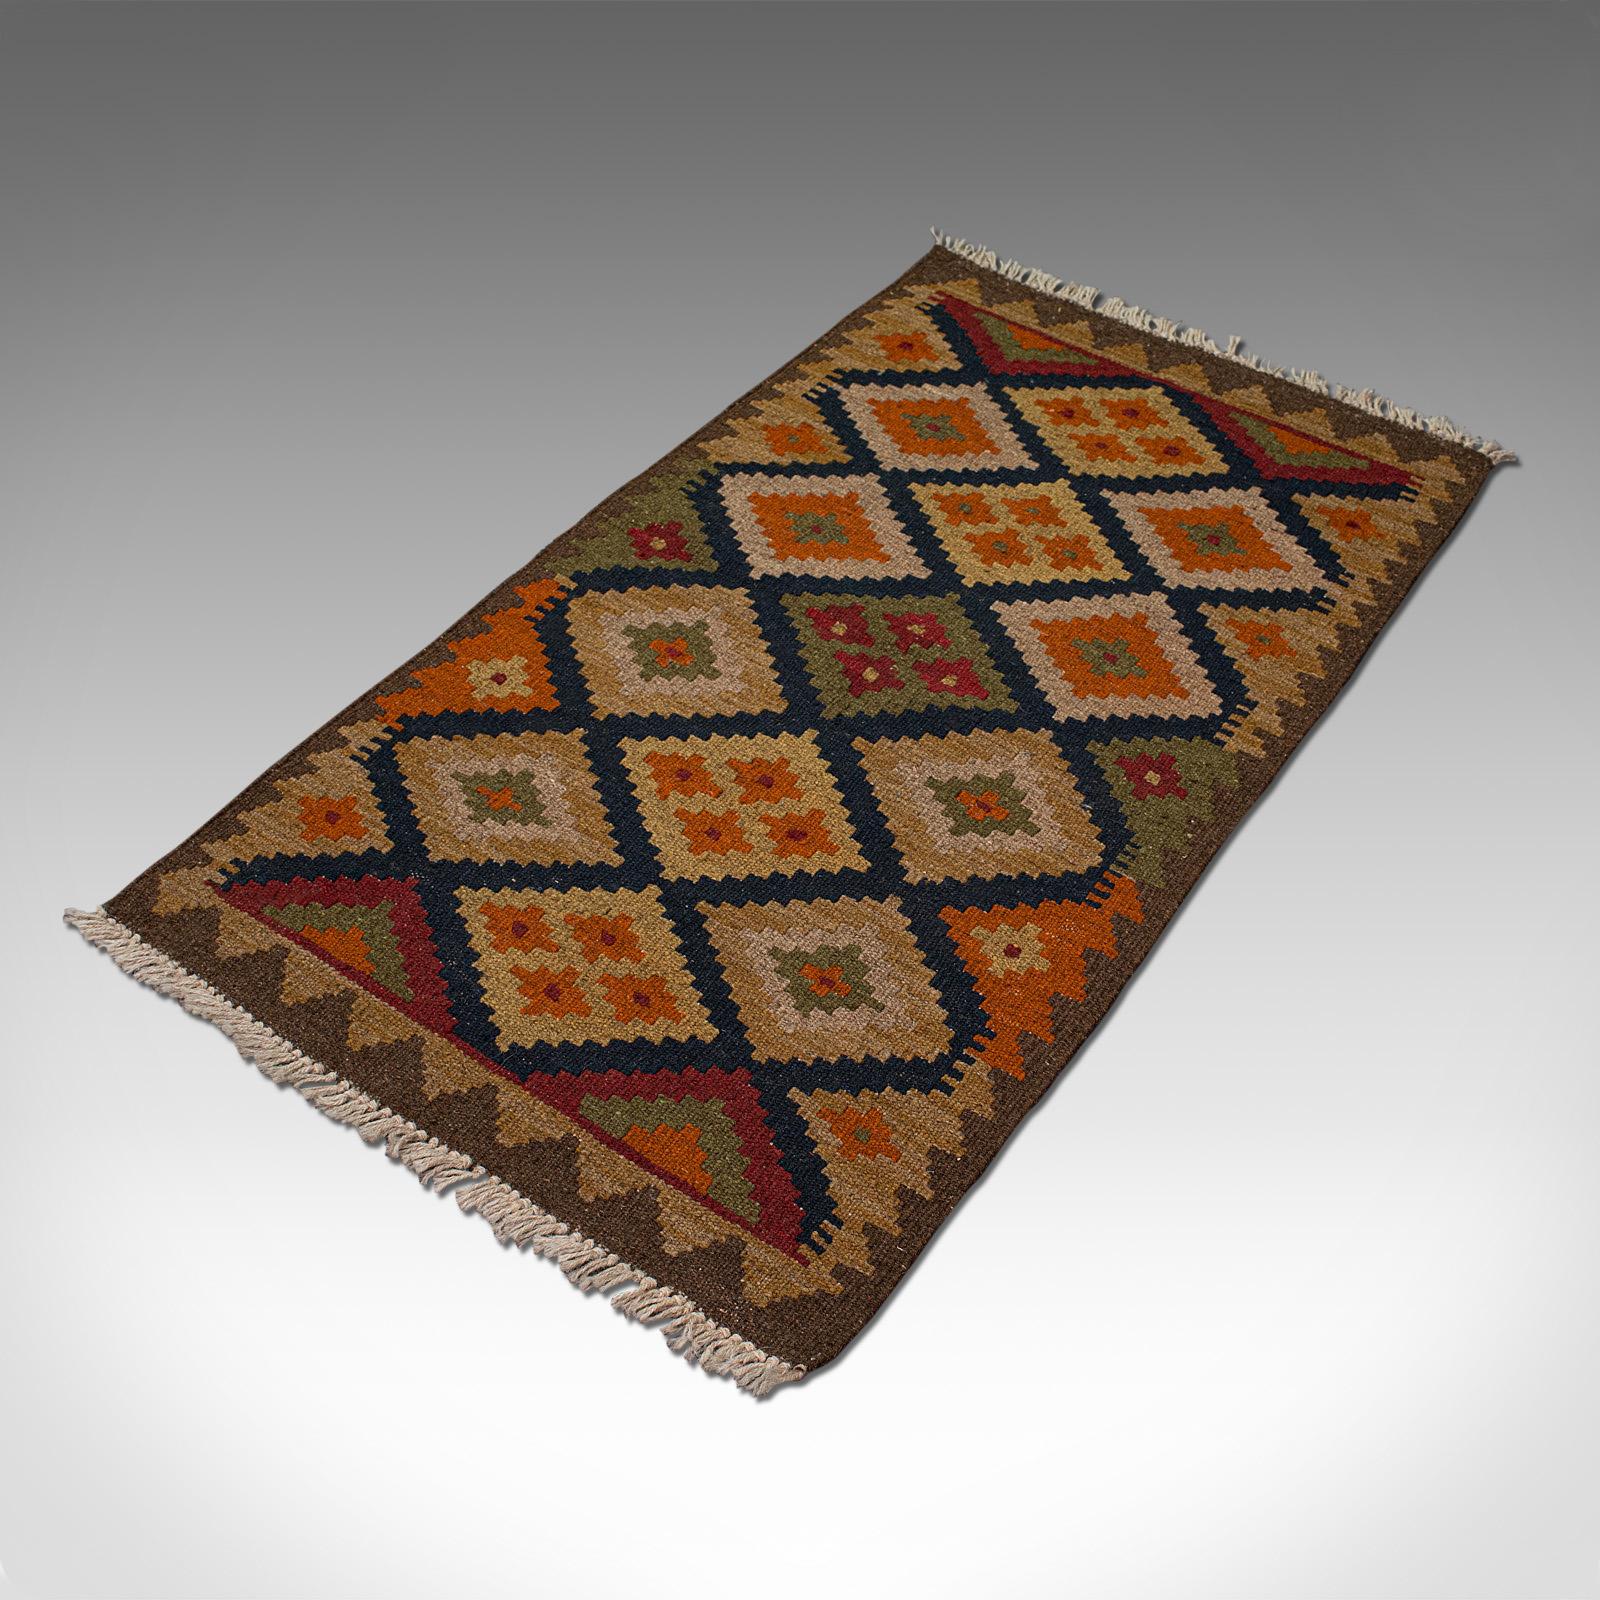 Small Vintage Maimana Kilim Rug, Middle Eastern, Woven, Prayer Mat, Circa 1960 In Good Condition For Sale In Hele, Devon, GB